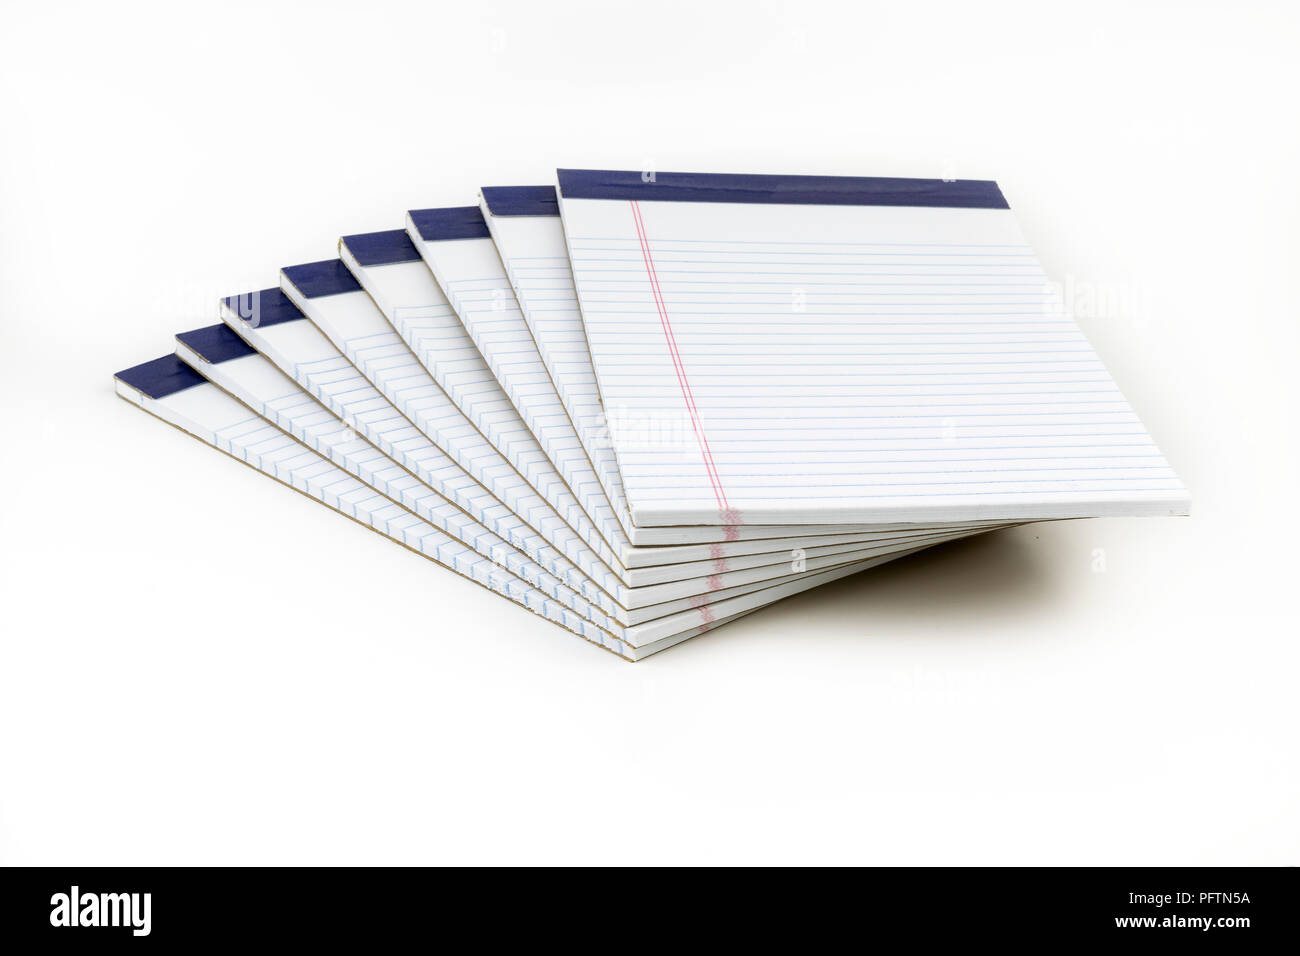 A neatly stacked pile of whte, ruled notebpads with blue binding.. These could be used as school or office supplies for taking notes and sharing ideas Stock Photo